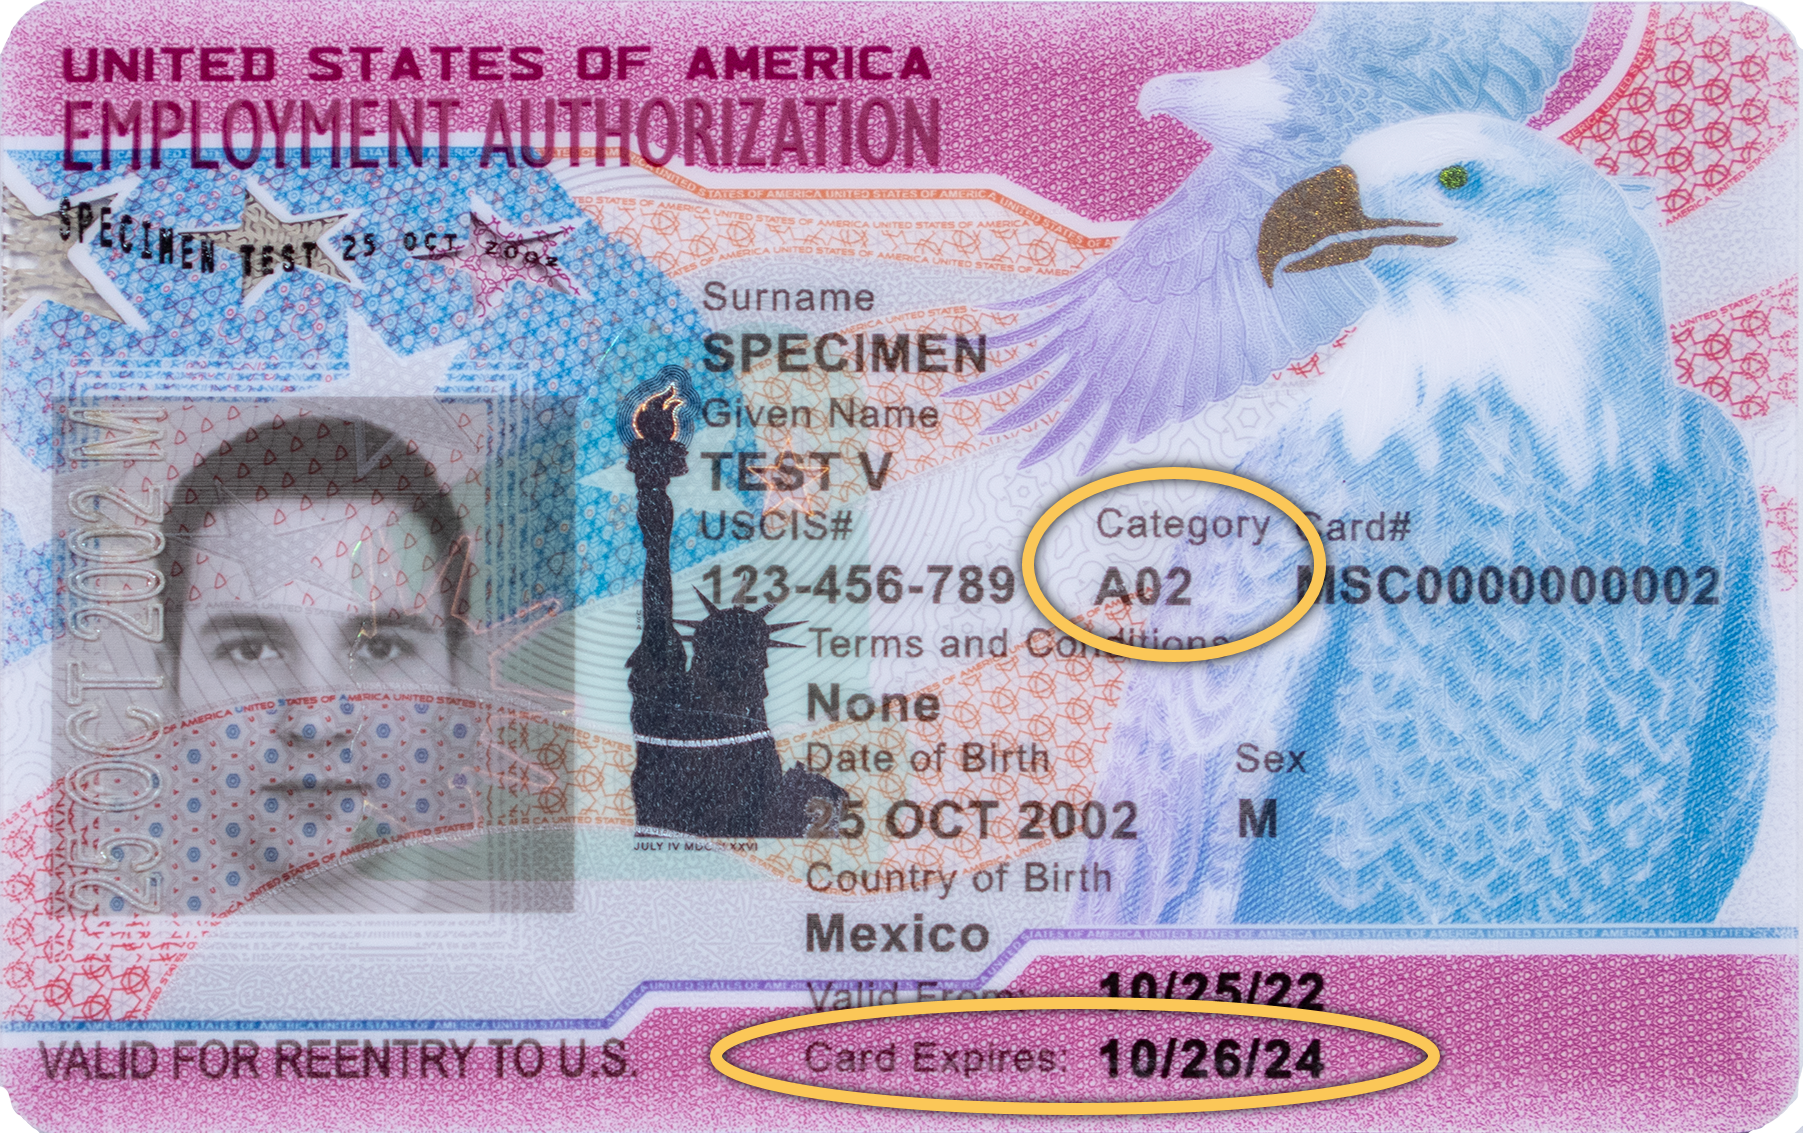 Screen capture of Sample Front View of Employment Authorization Card